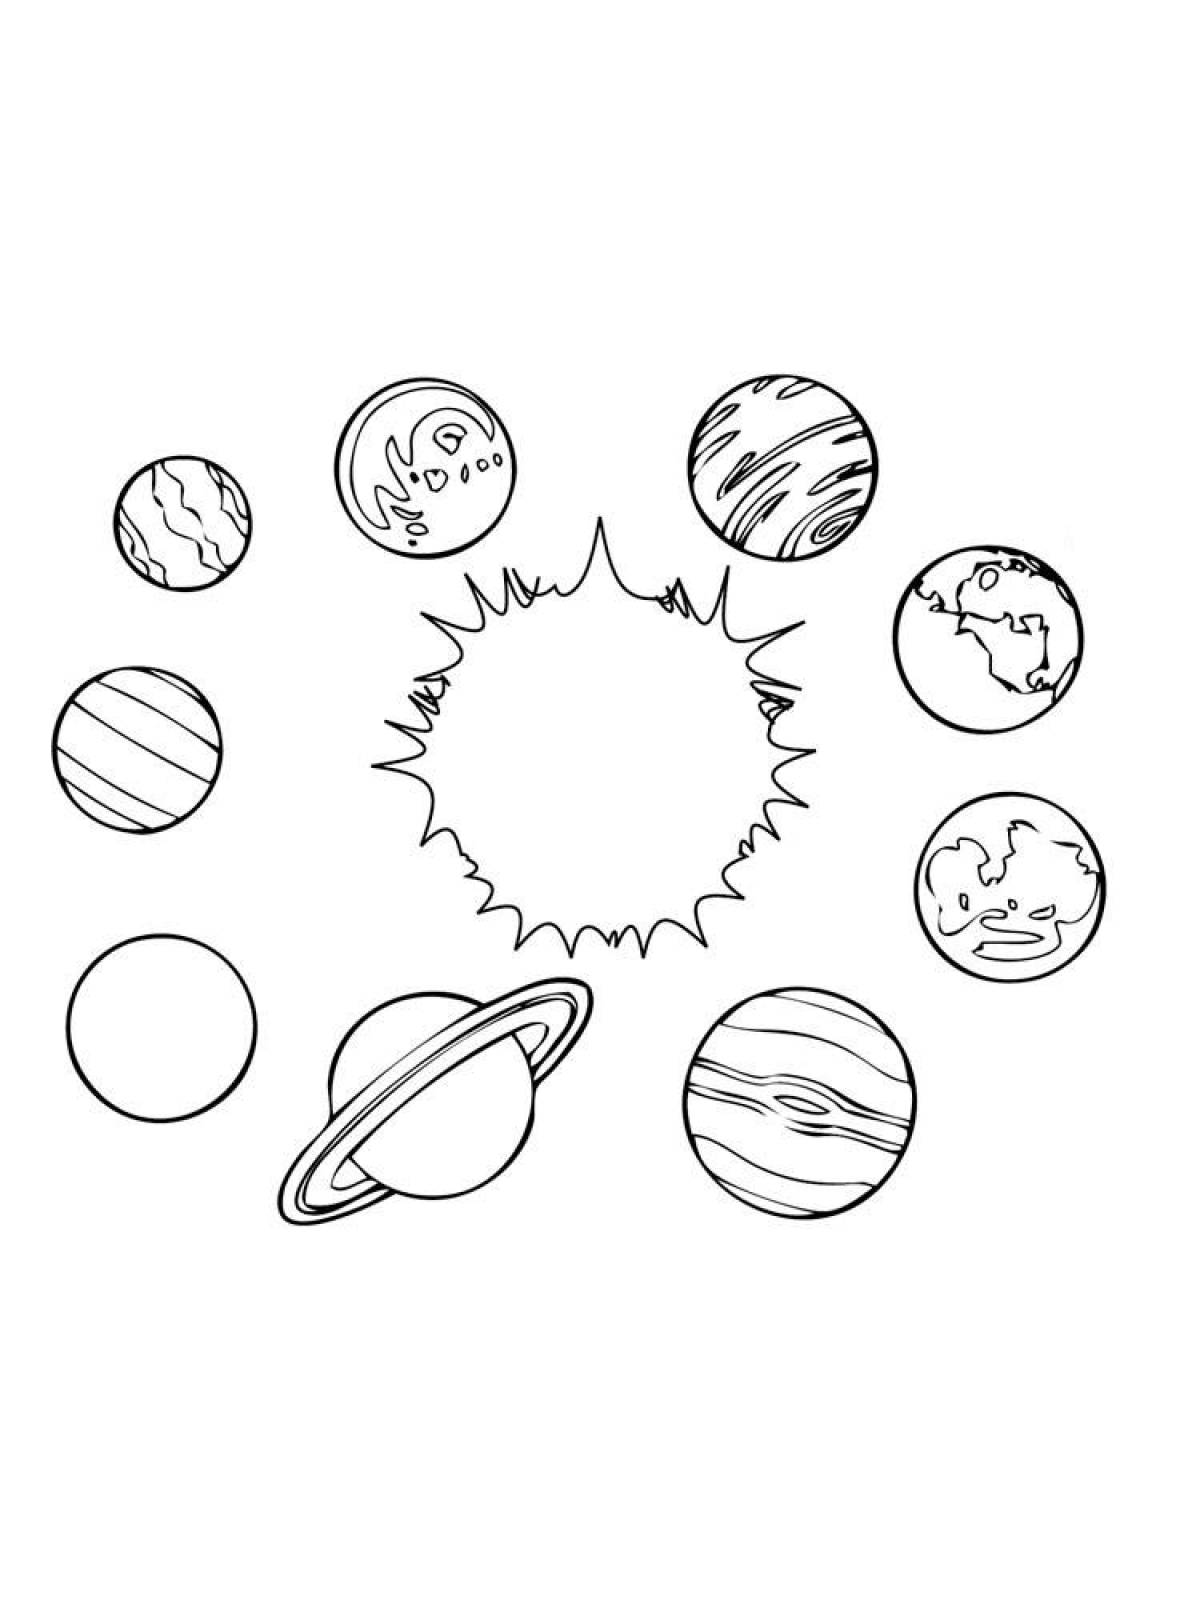 Planets of the solar system #6